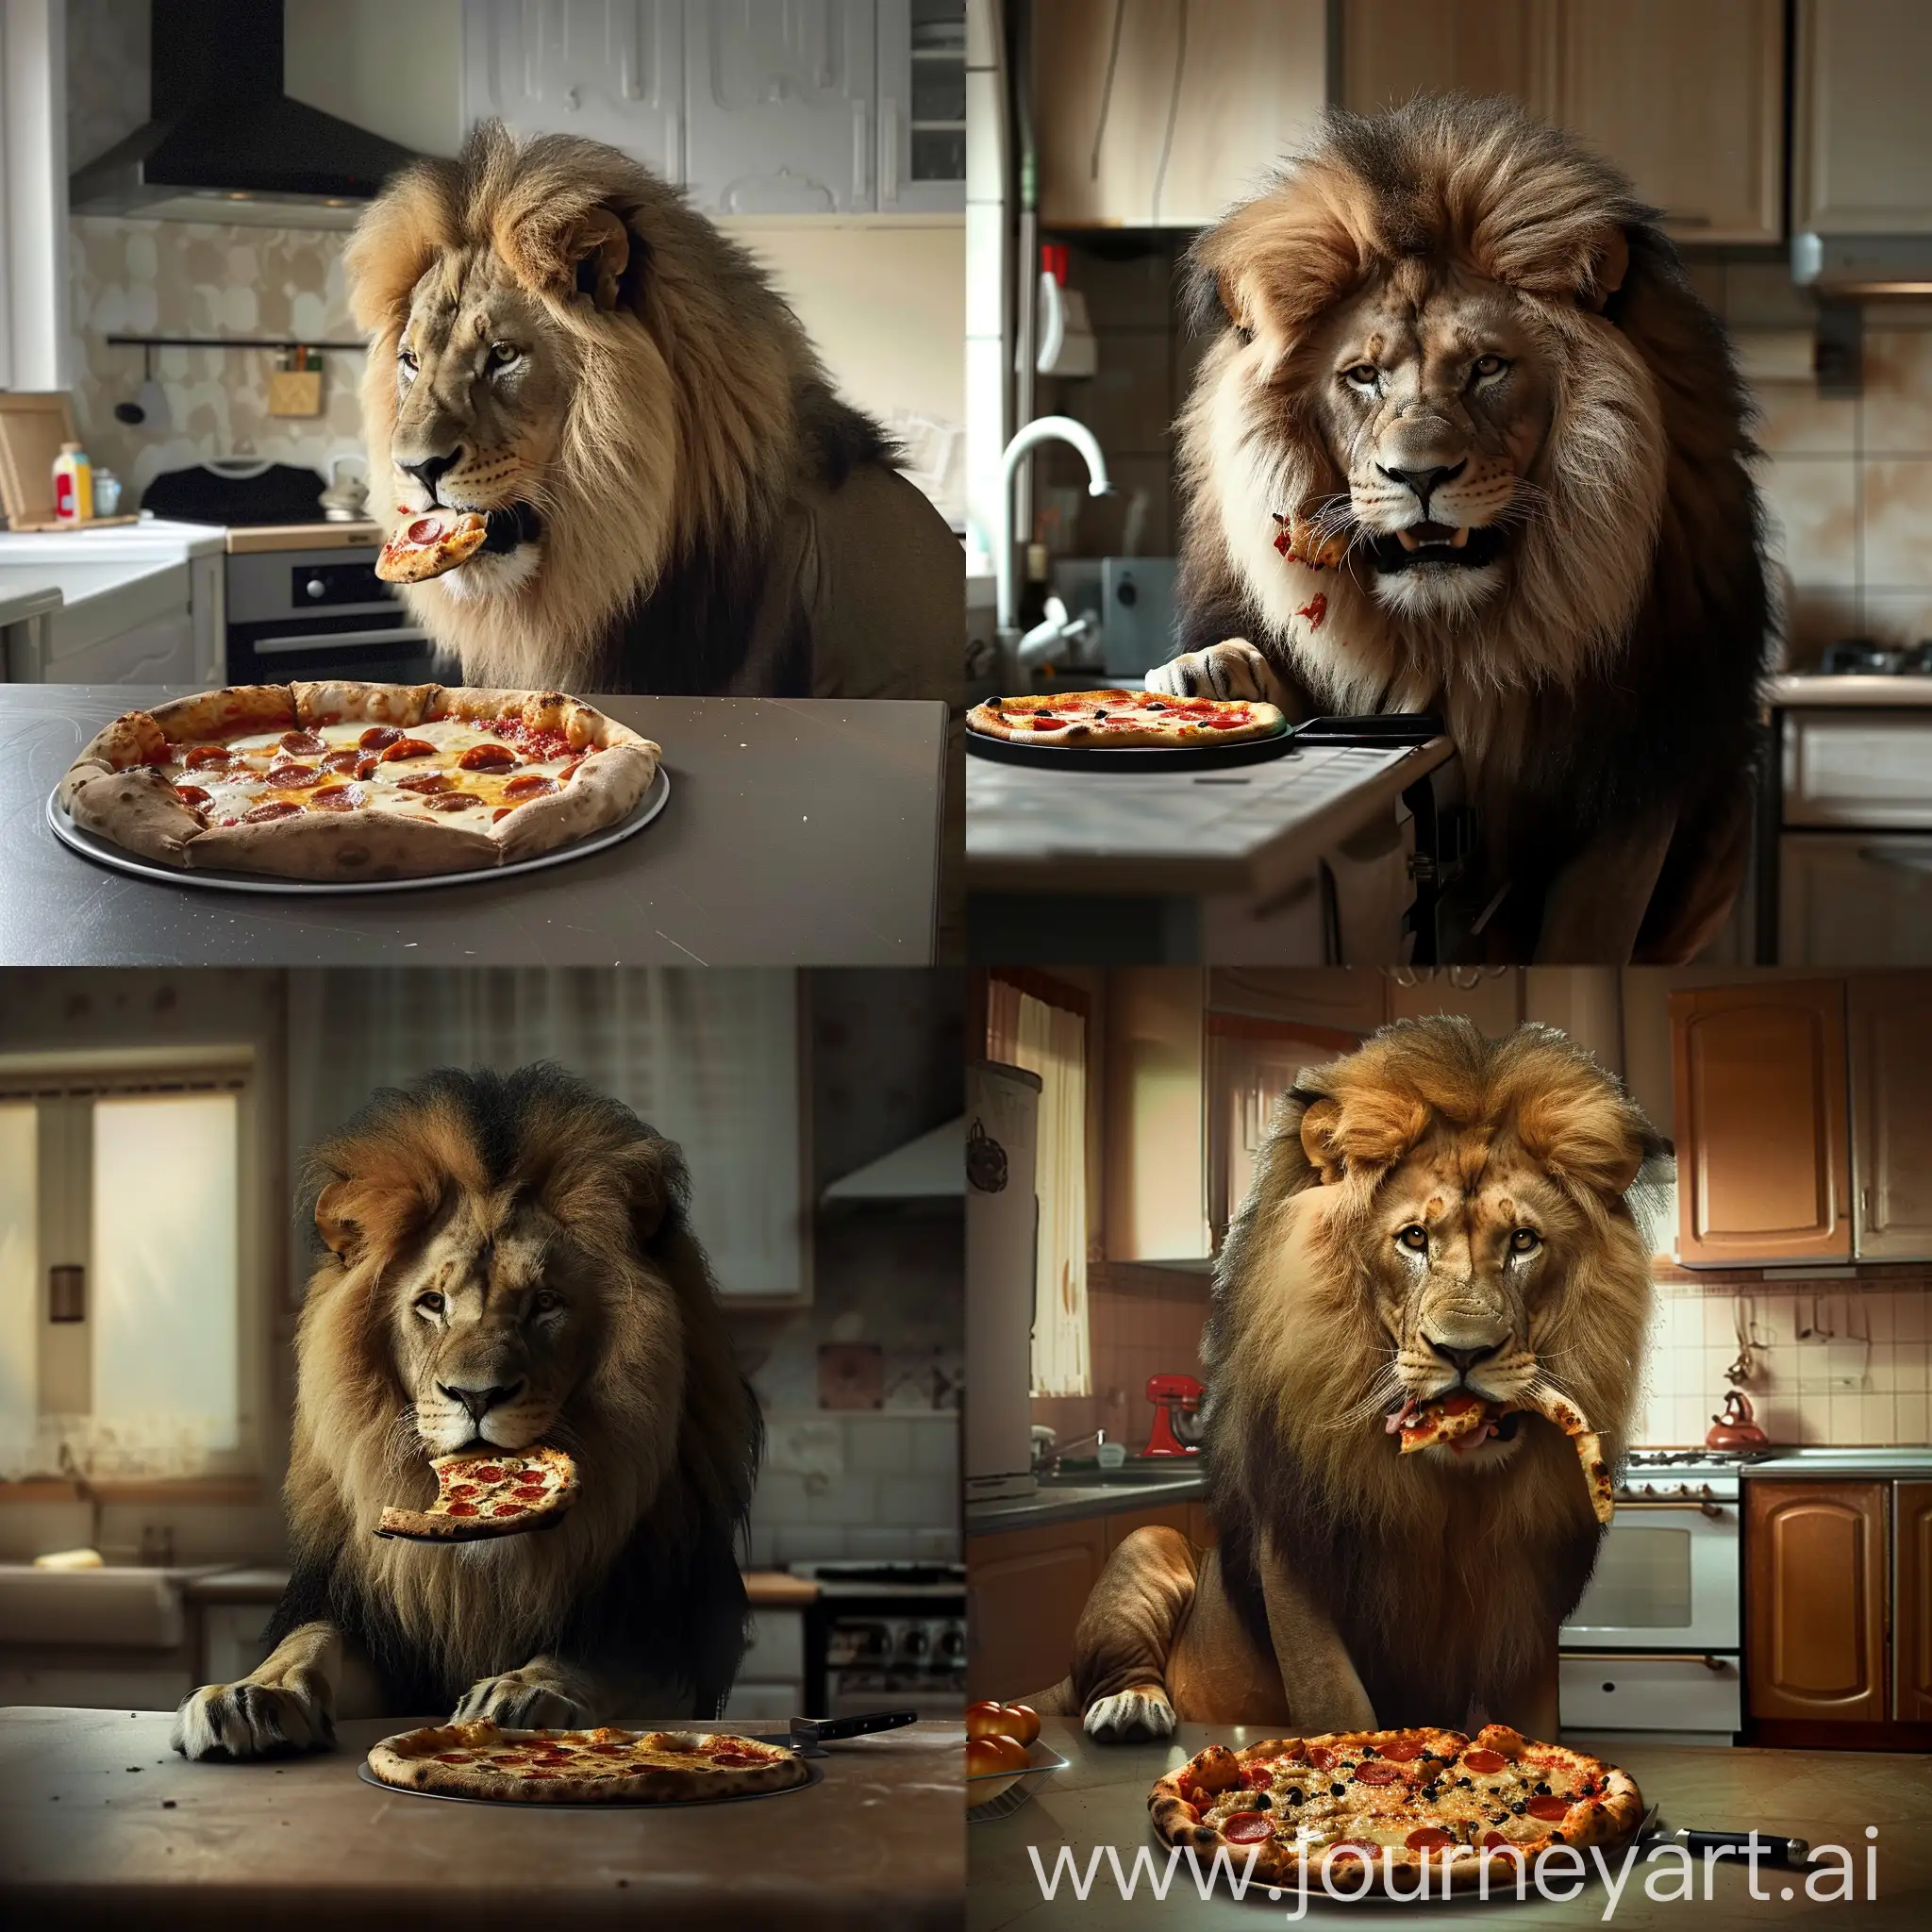 a lion in a kitchen eating a pizza